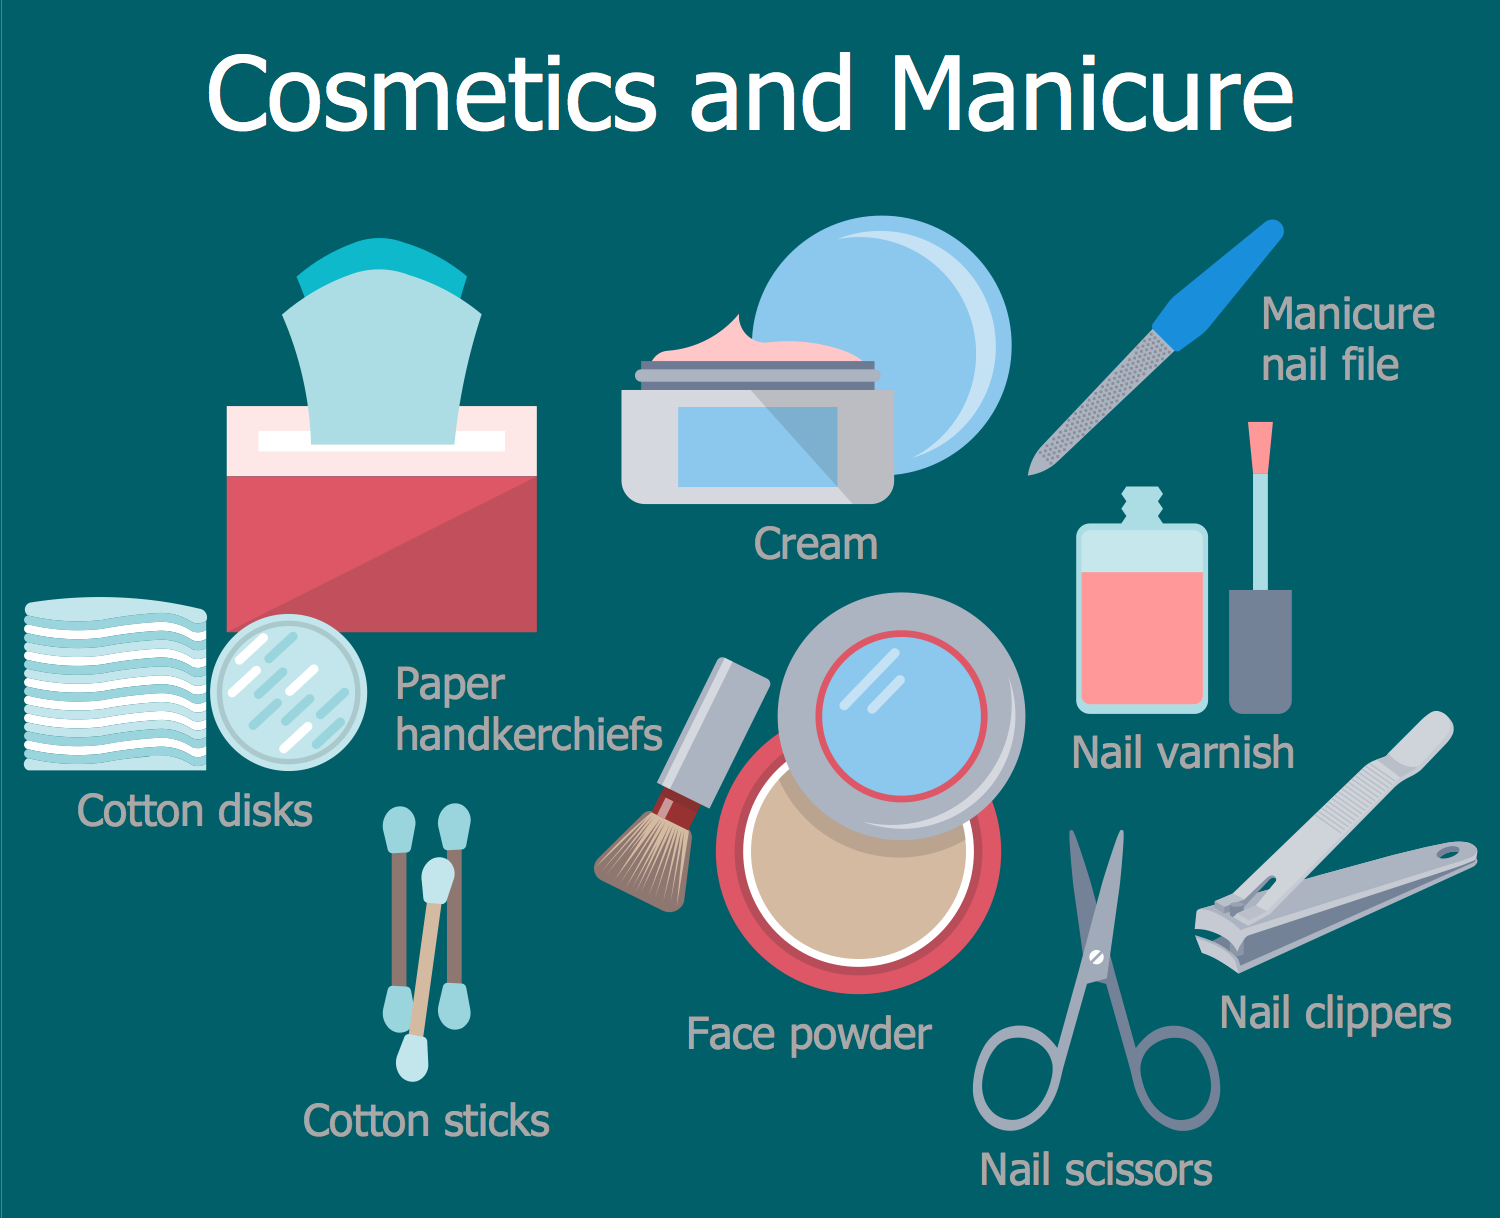 Pharmacy Pictures - Cosmetics and Manicure